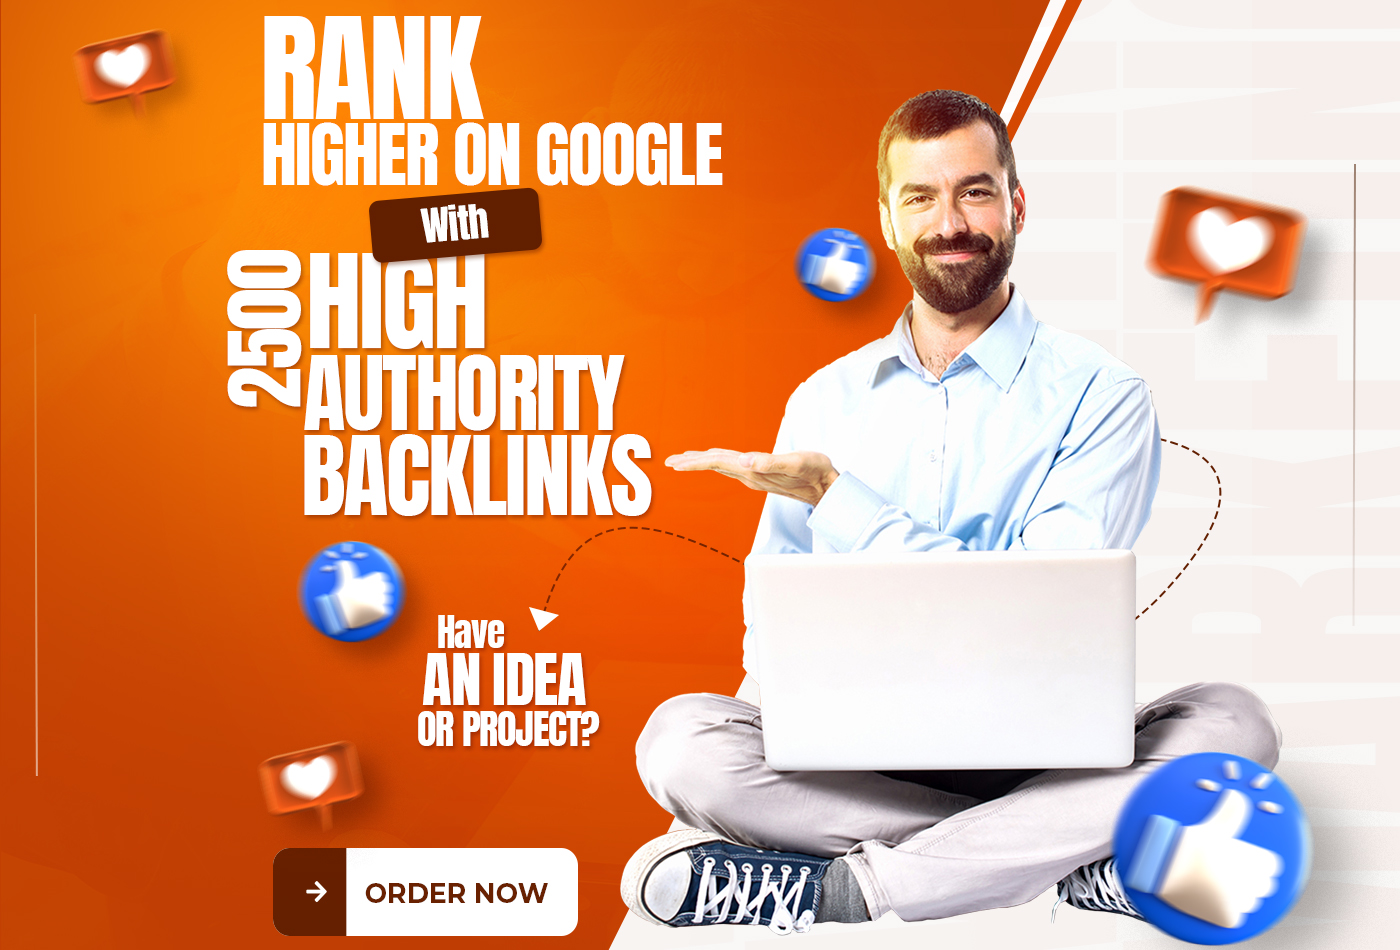 Rank Higher On Google With 2500 DA 50+ Backlinks - PBN, Guest Post, Sidebar, Blog Comments, Profile